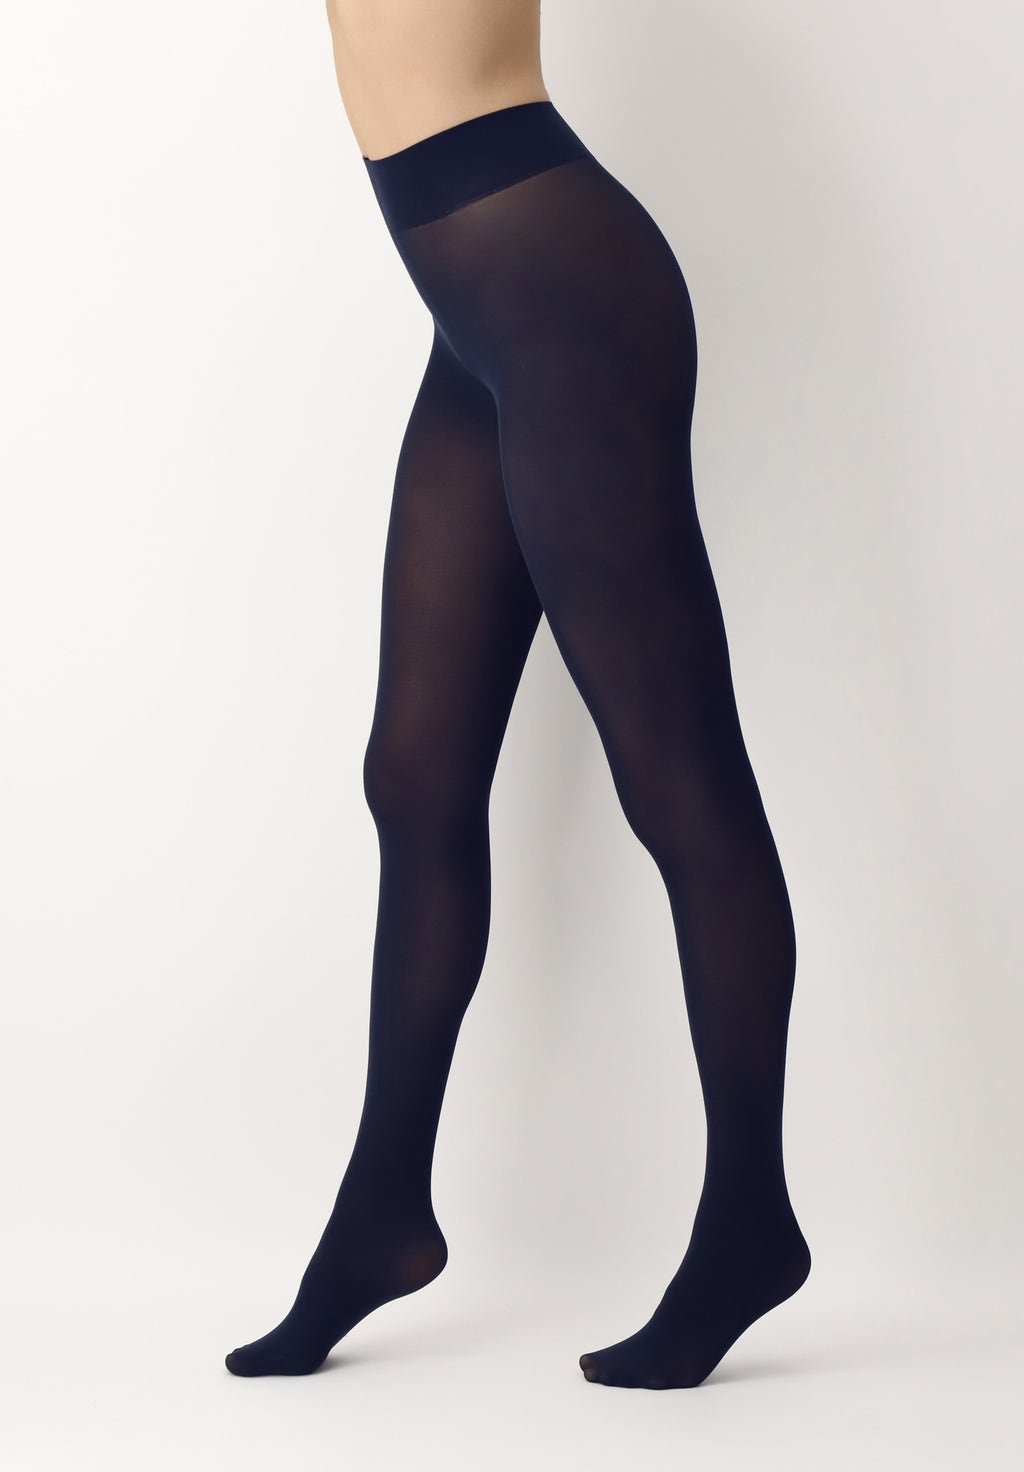 Twins Microfibre Opaque Opaque Tights Bipack